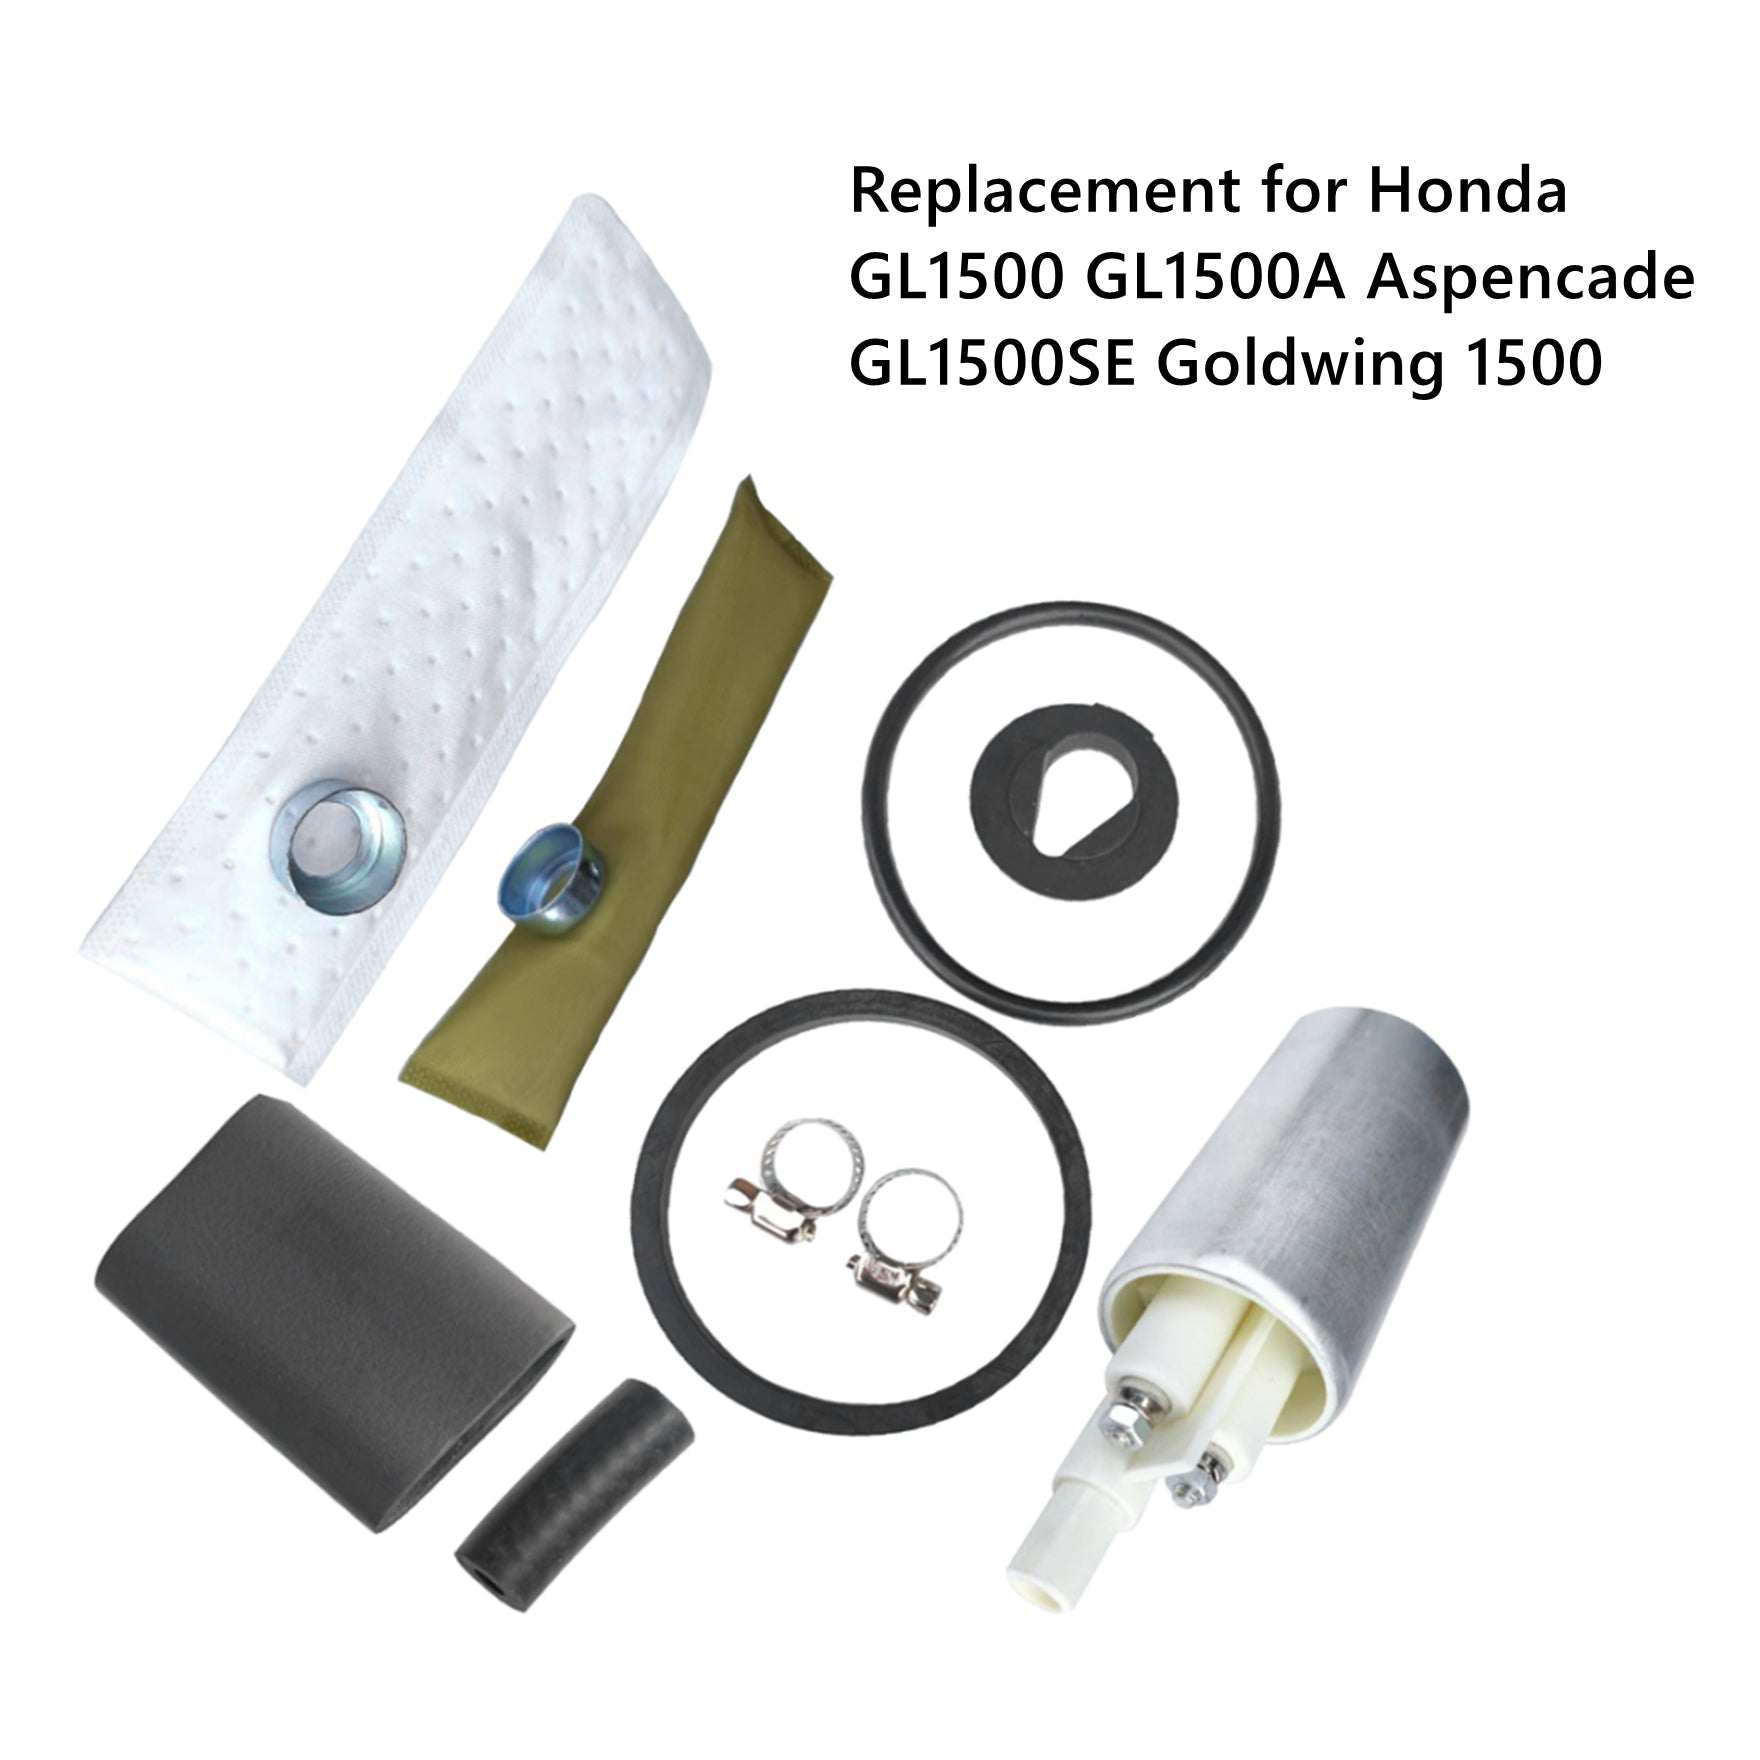 labwork Motorcycle Fuel Pump Kit Replacement for Honda GL1500 16700-MAF-870